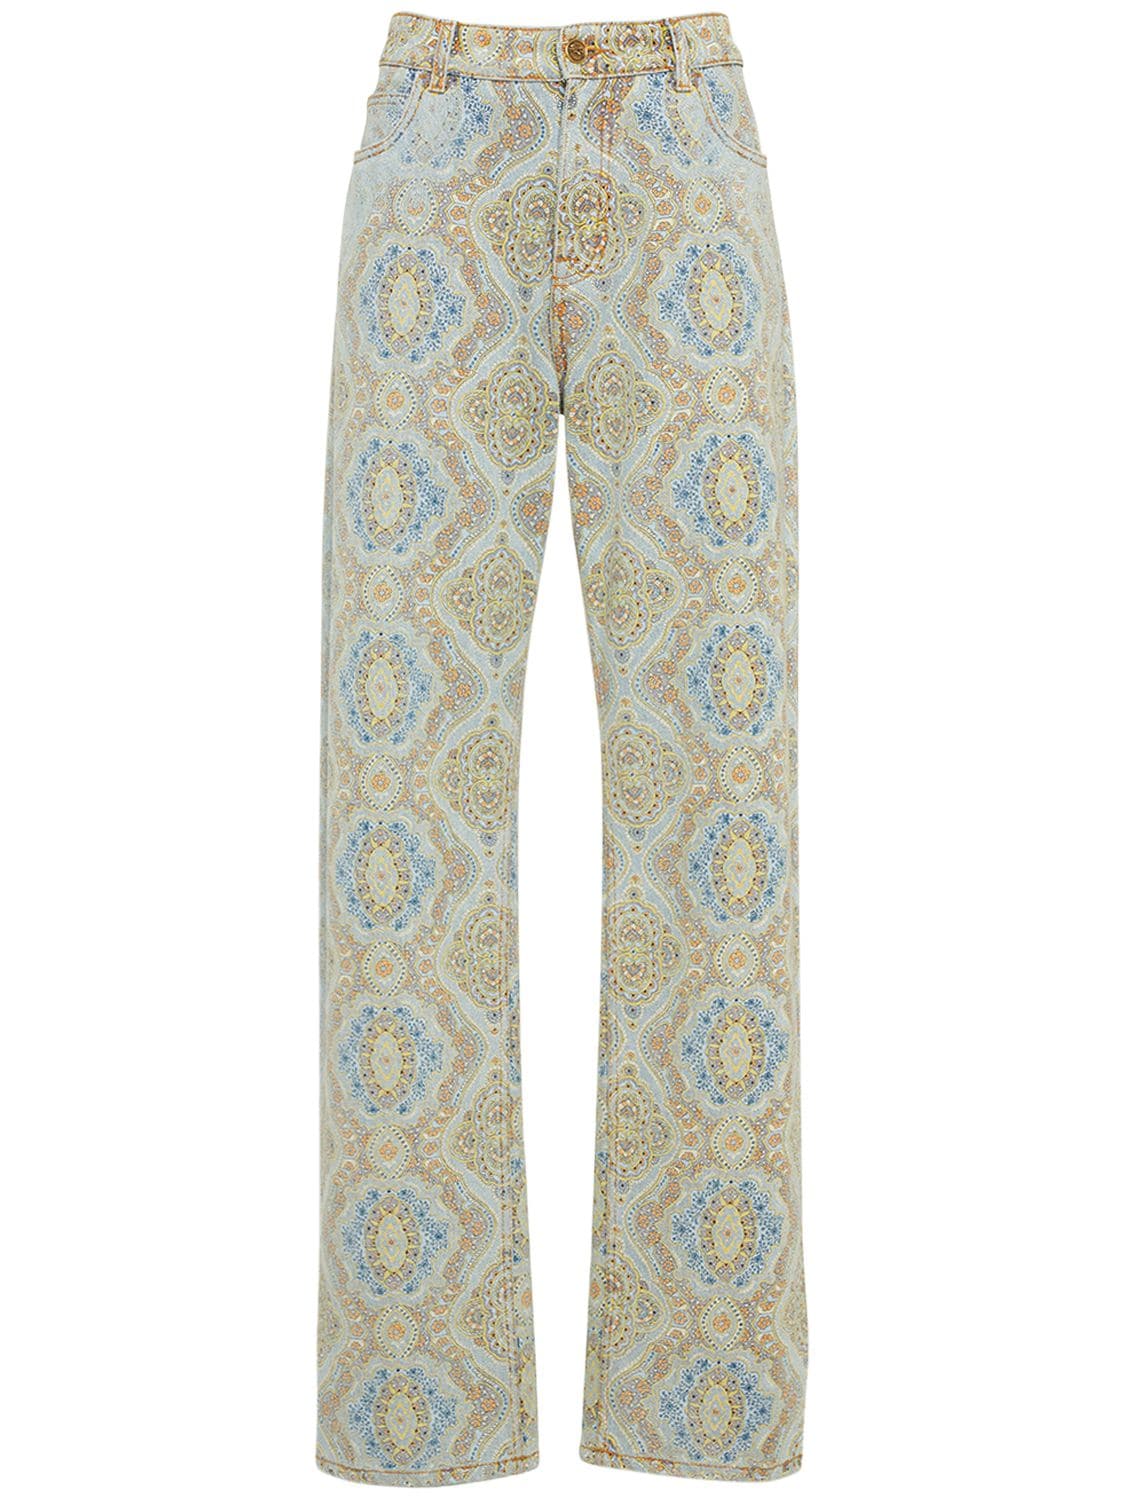 Etro Printed Cotton Denim High Rise Jeans In Blue